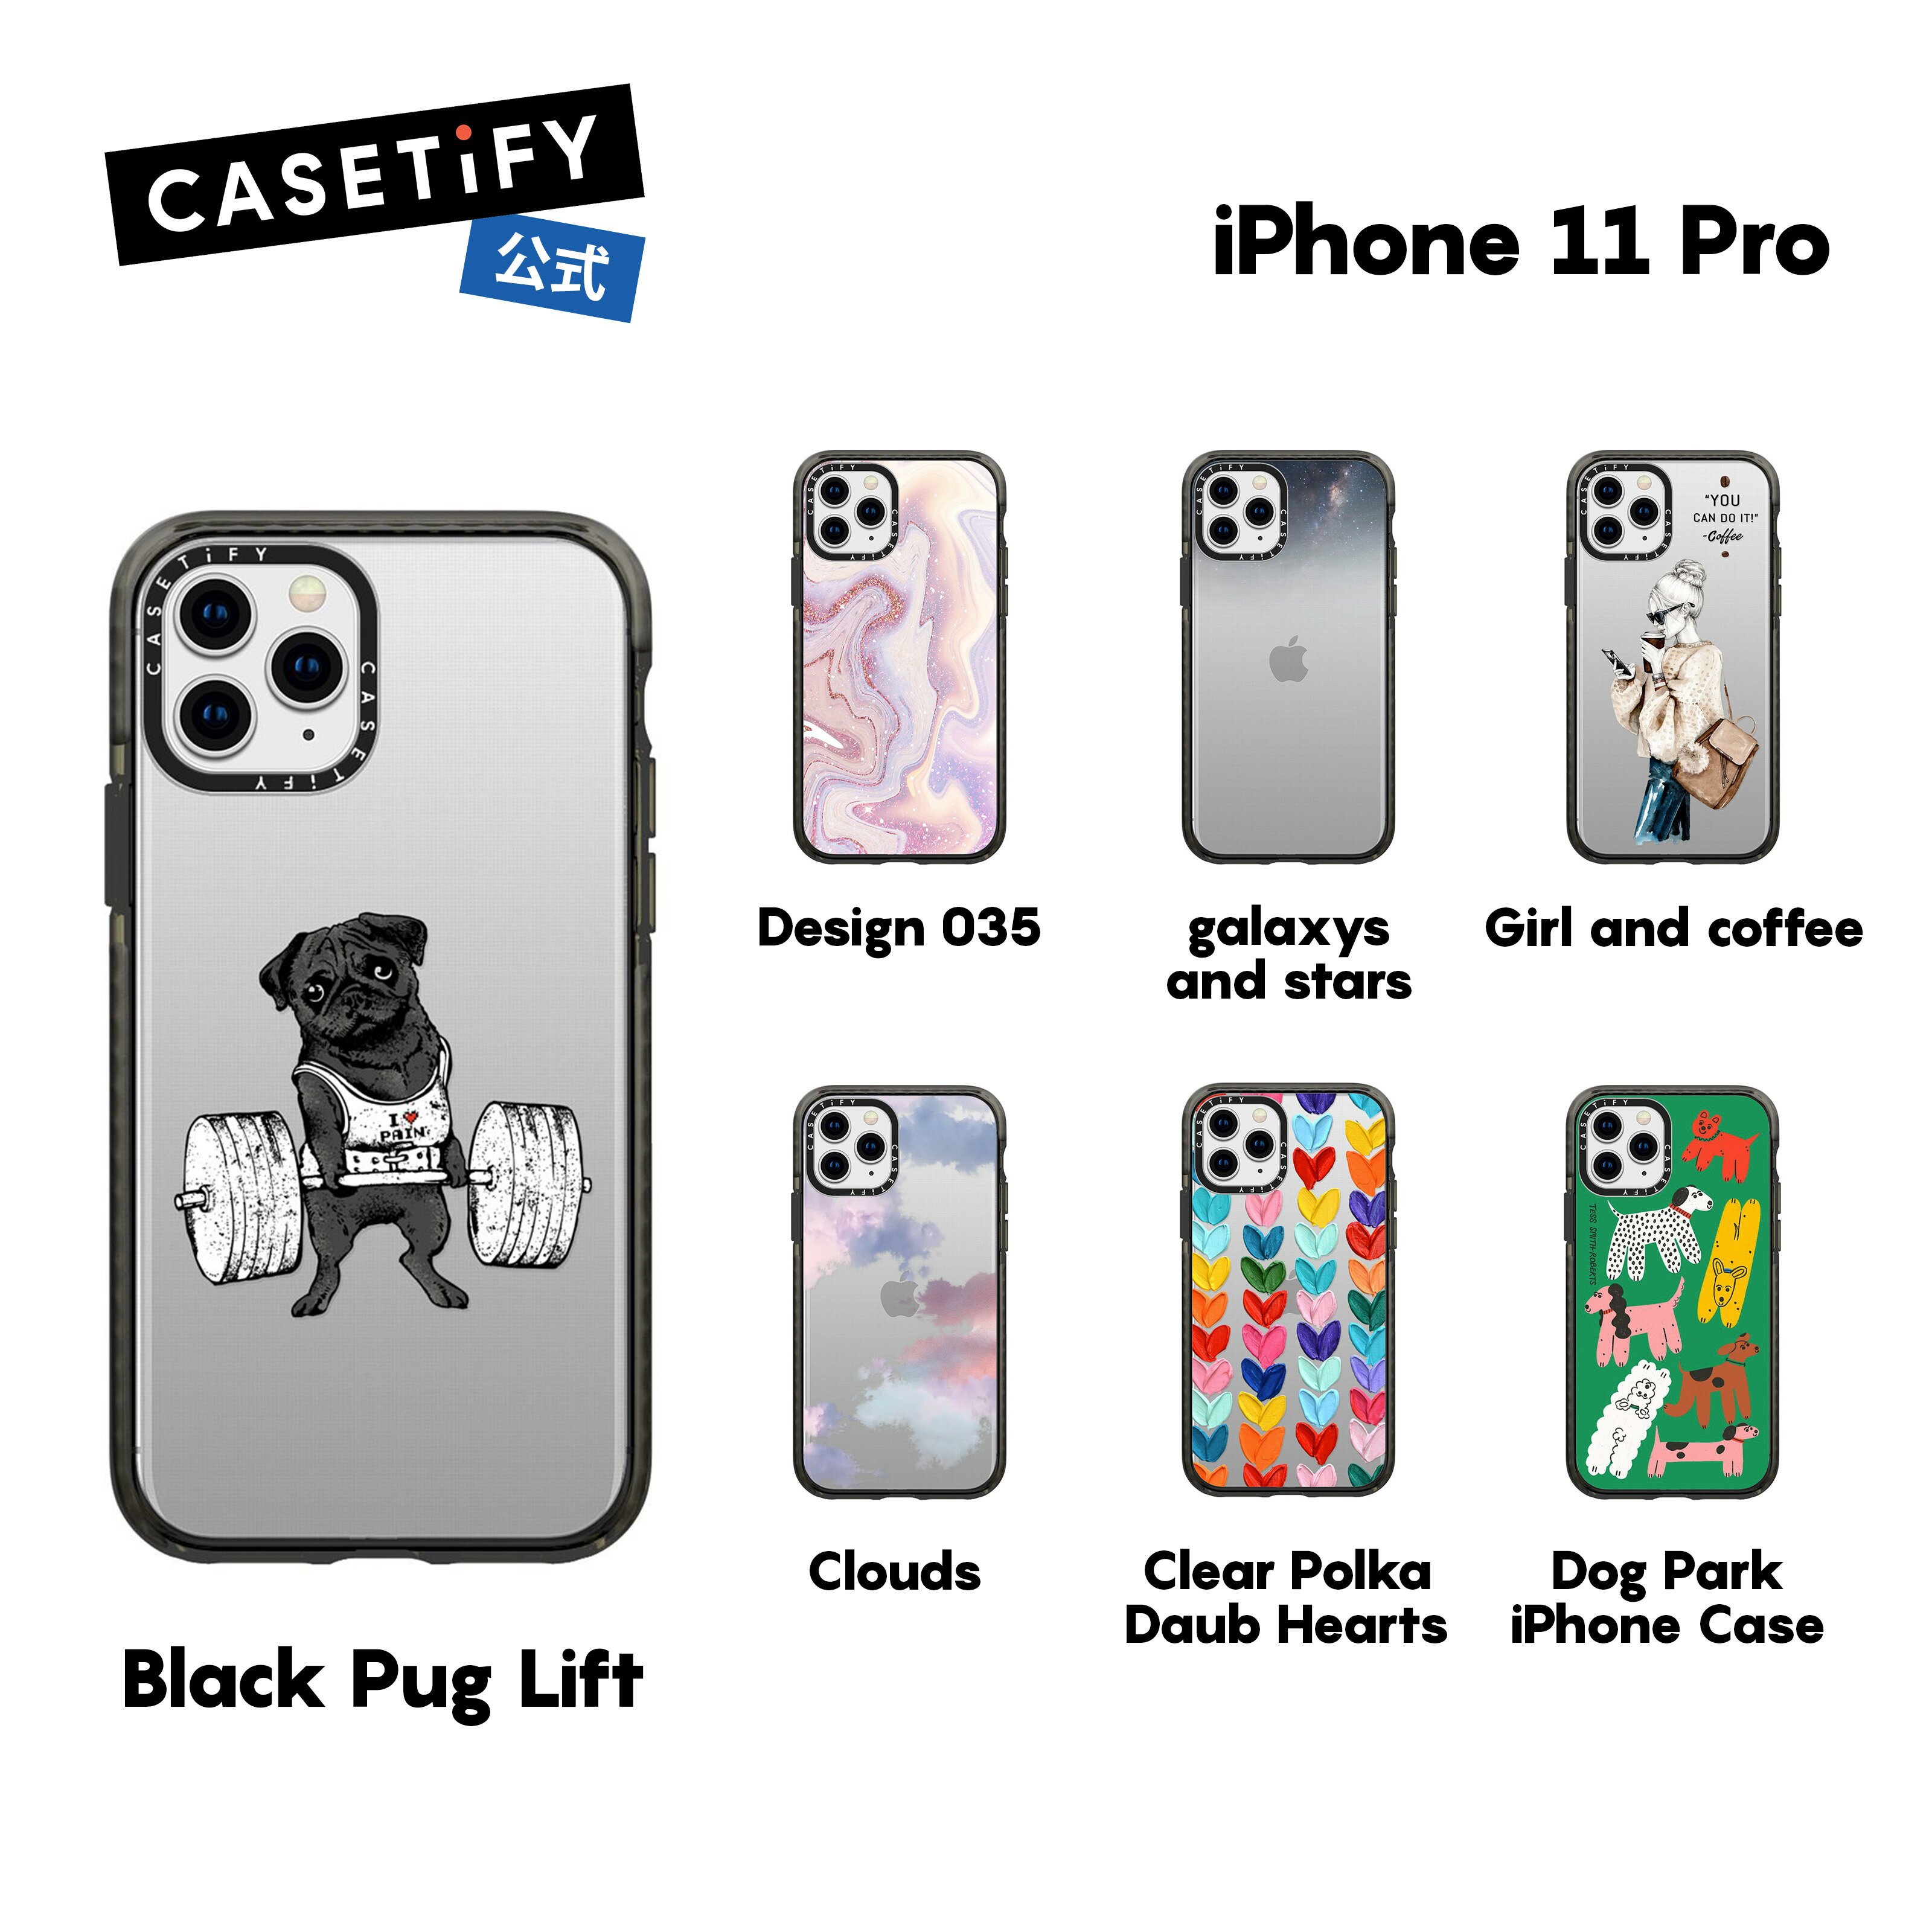 CASETiFY iPhone 11Pro インパクトケース クリア ブラック クリア フロスト Clear Polka Daub Hearts Clouds Girl and Coffee Black Pug Lift iPhoneケース iPhone 11Pro 耐衝撃 保護ケース 透明